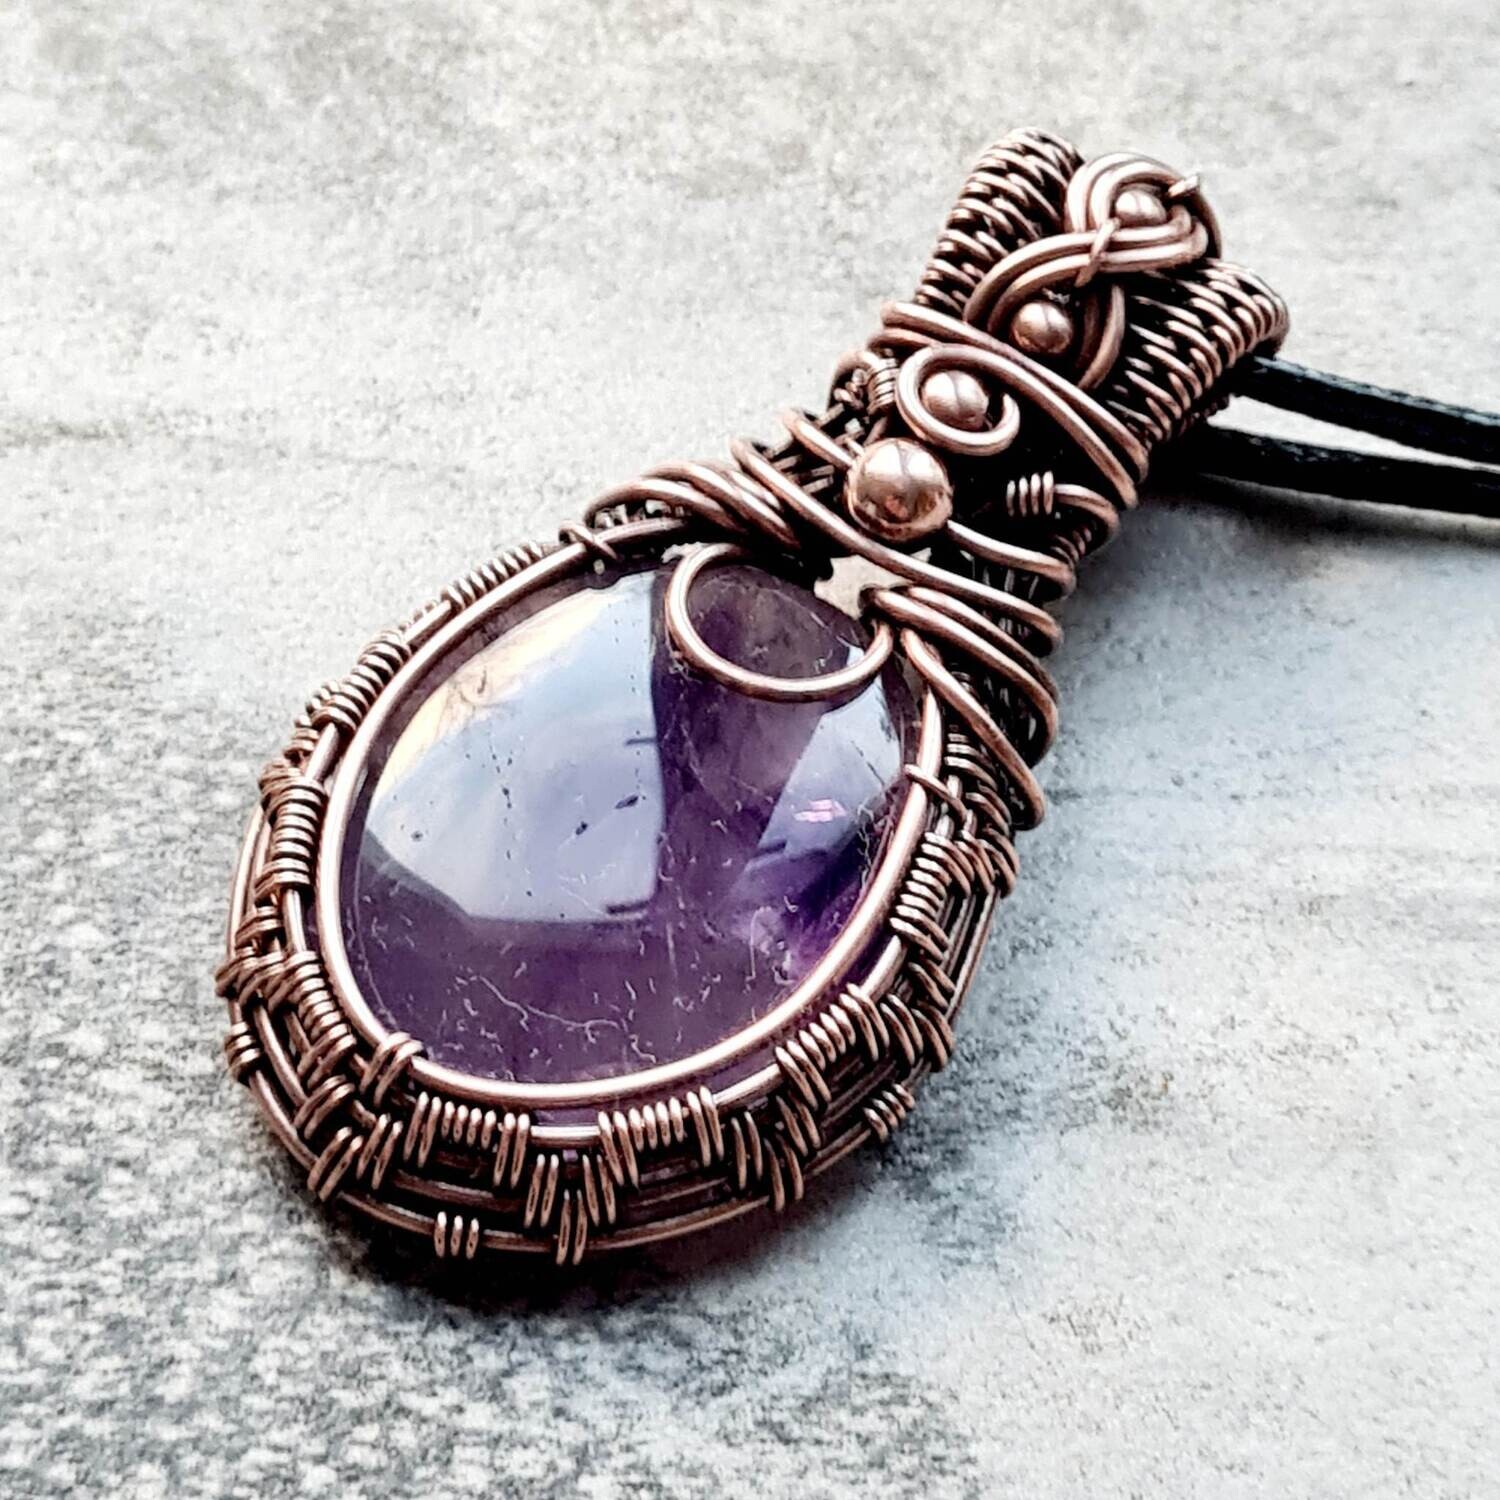 Star Amethyst with beads pendant with chain.